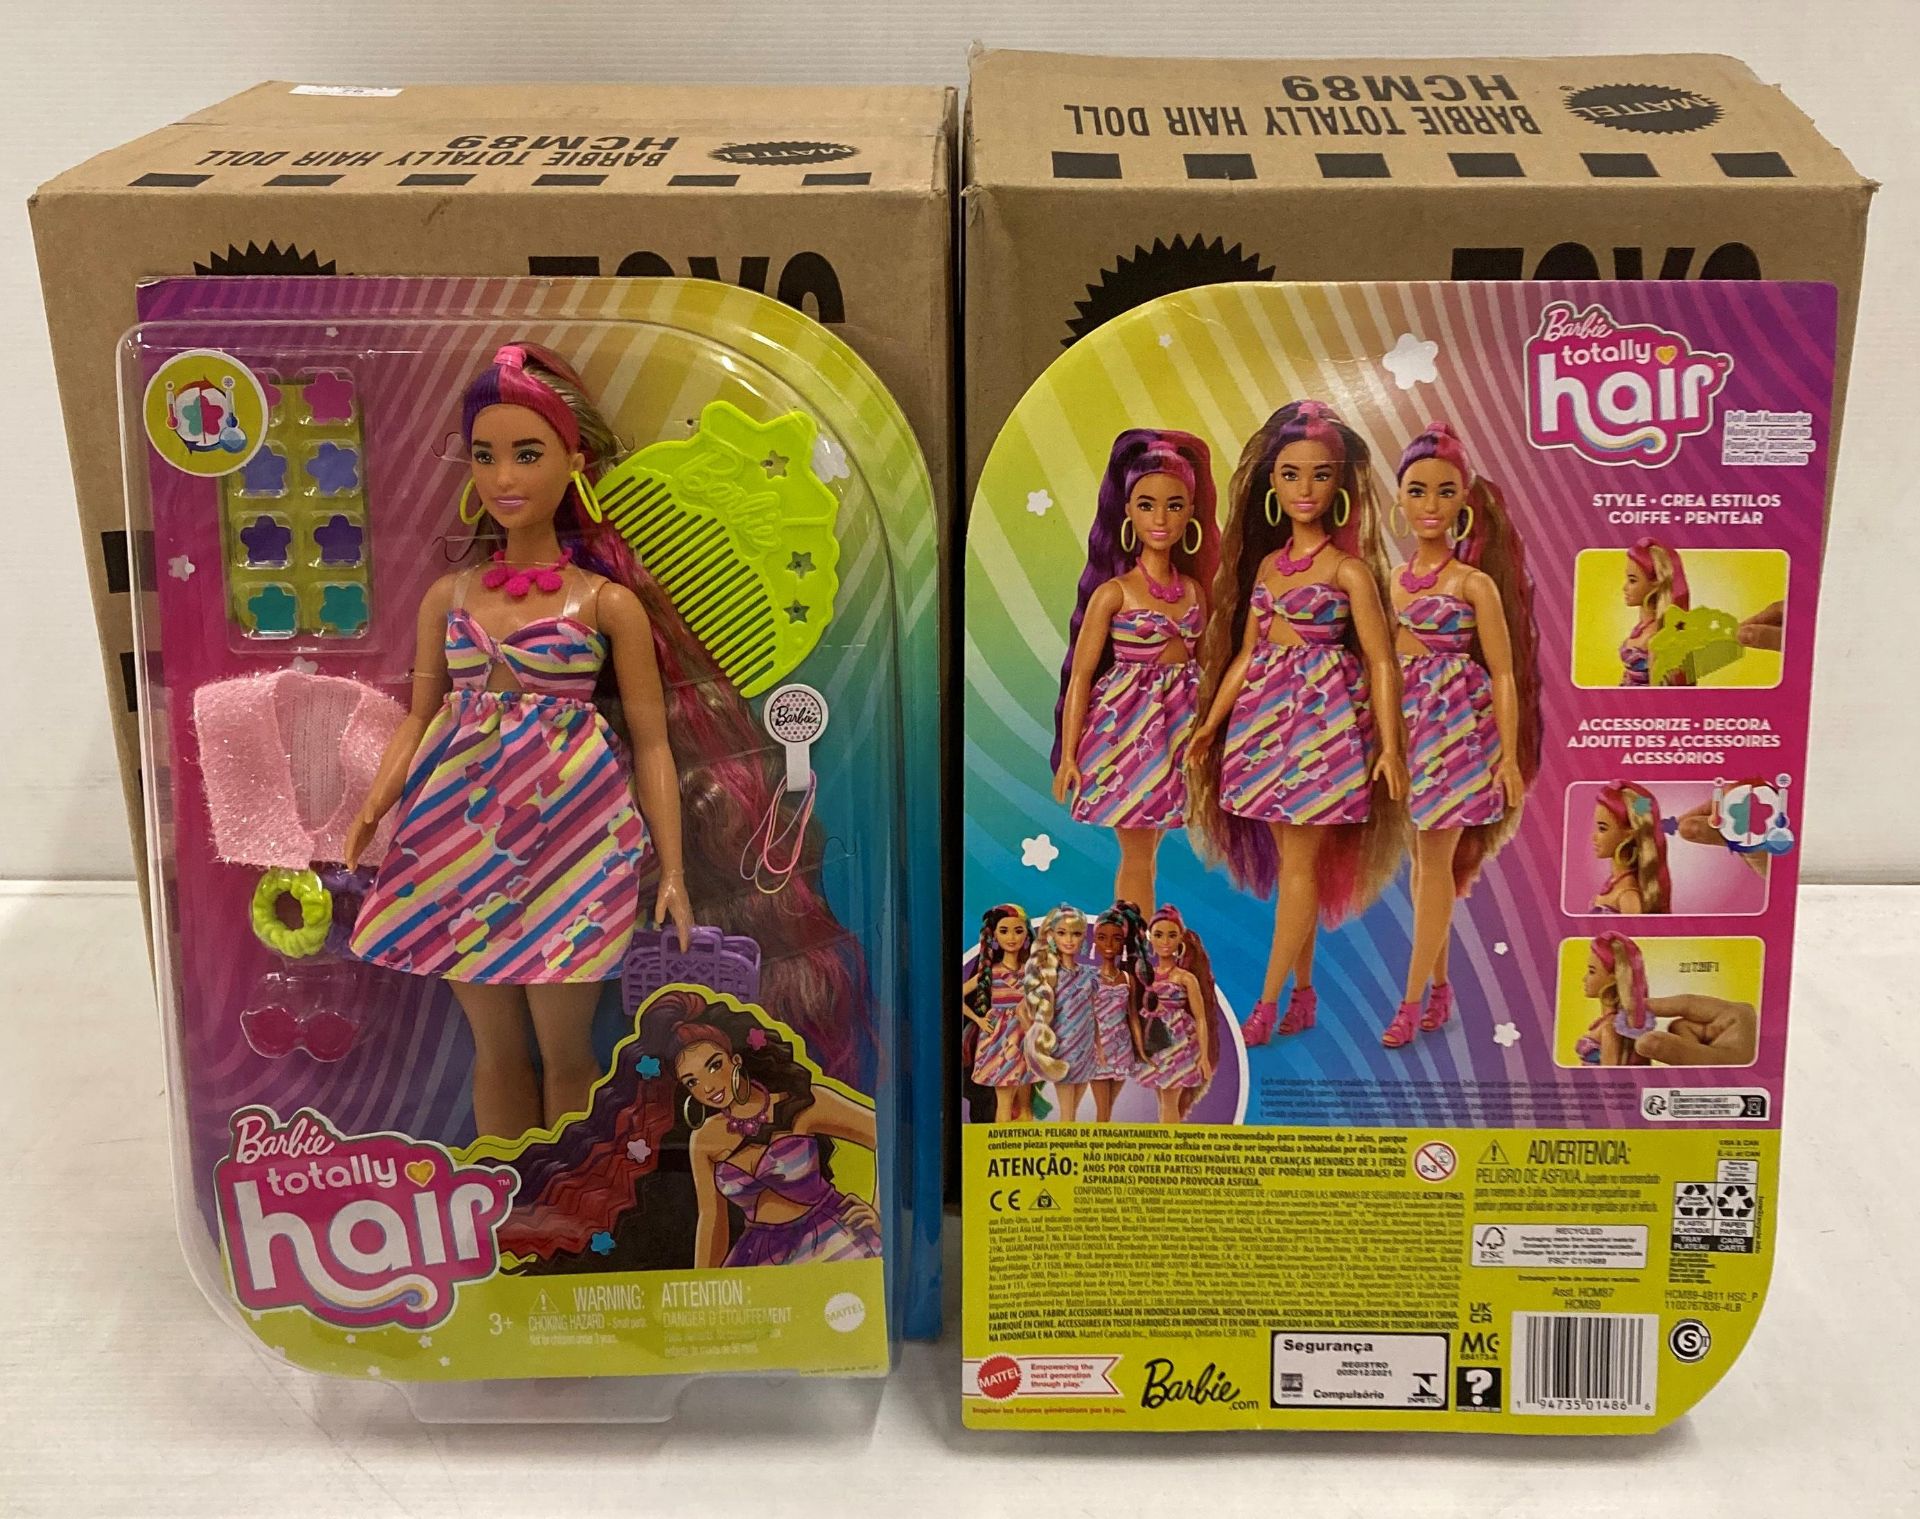 8 x Barbie Totally Hair doll and accessories (2 x outer boxes) (saleroom location: M06)